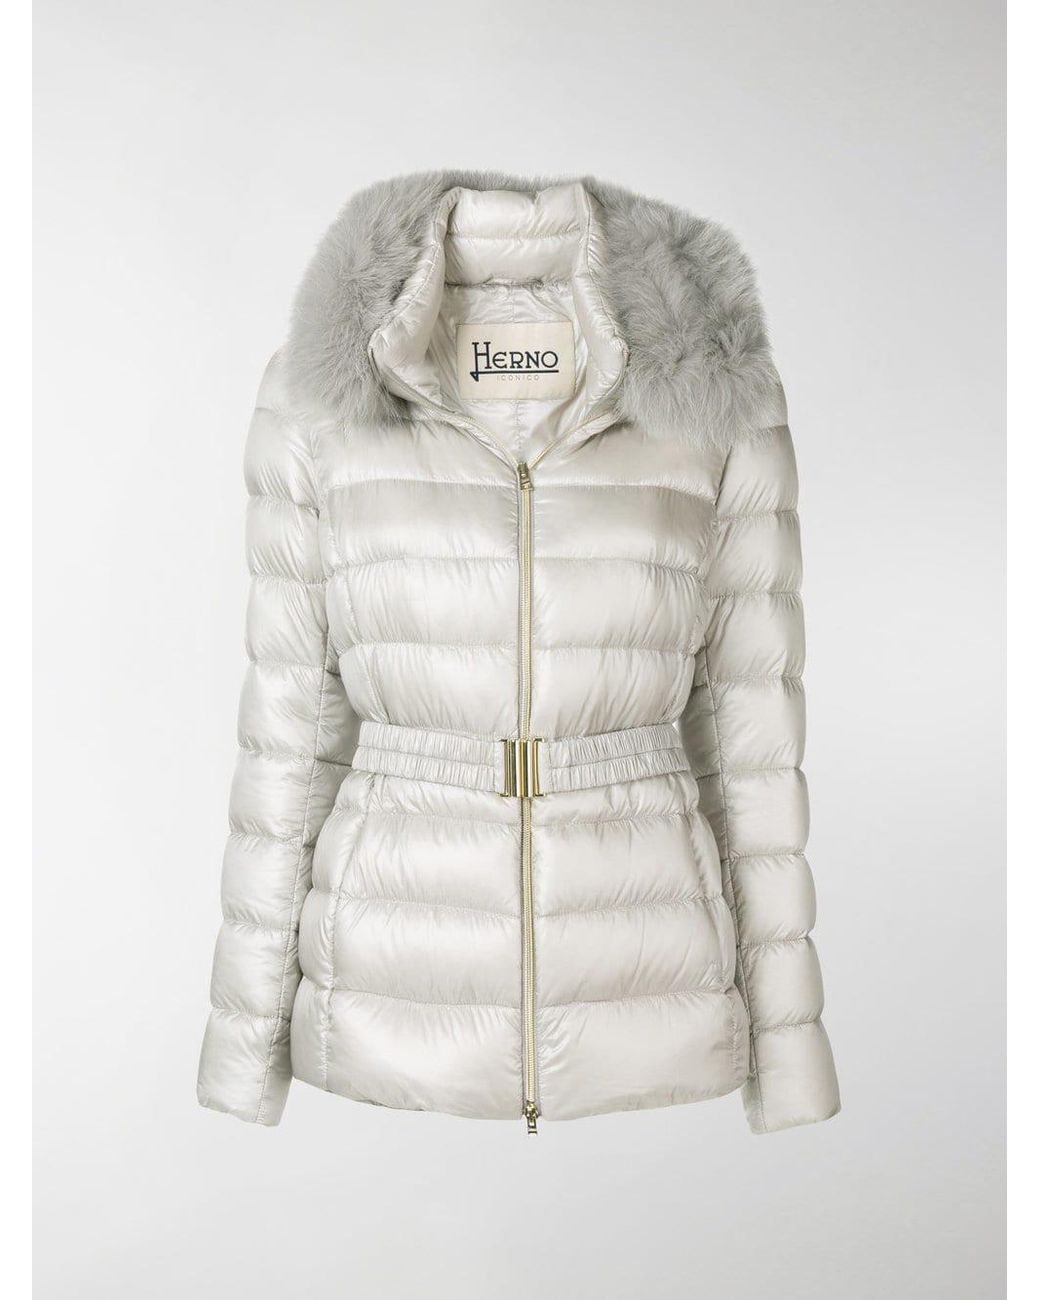 Herno Iconic Claudia Fur-trimmed Shell Jacket | Lyst